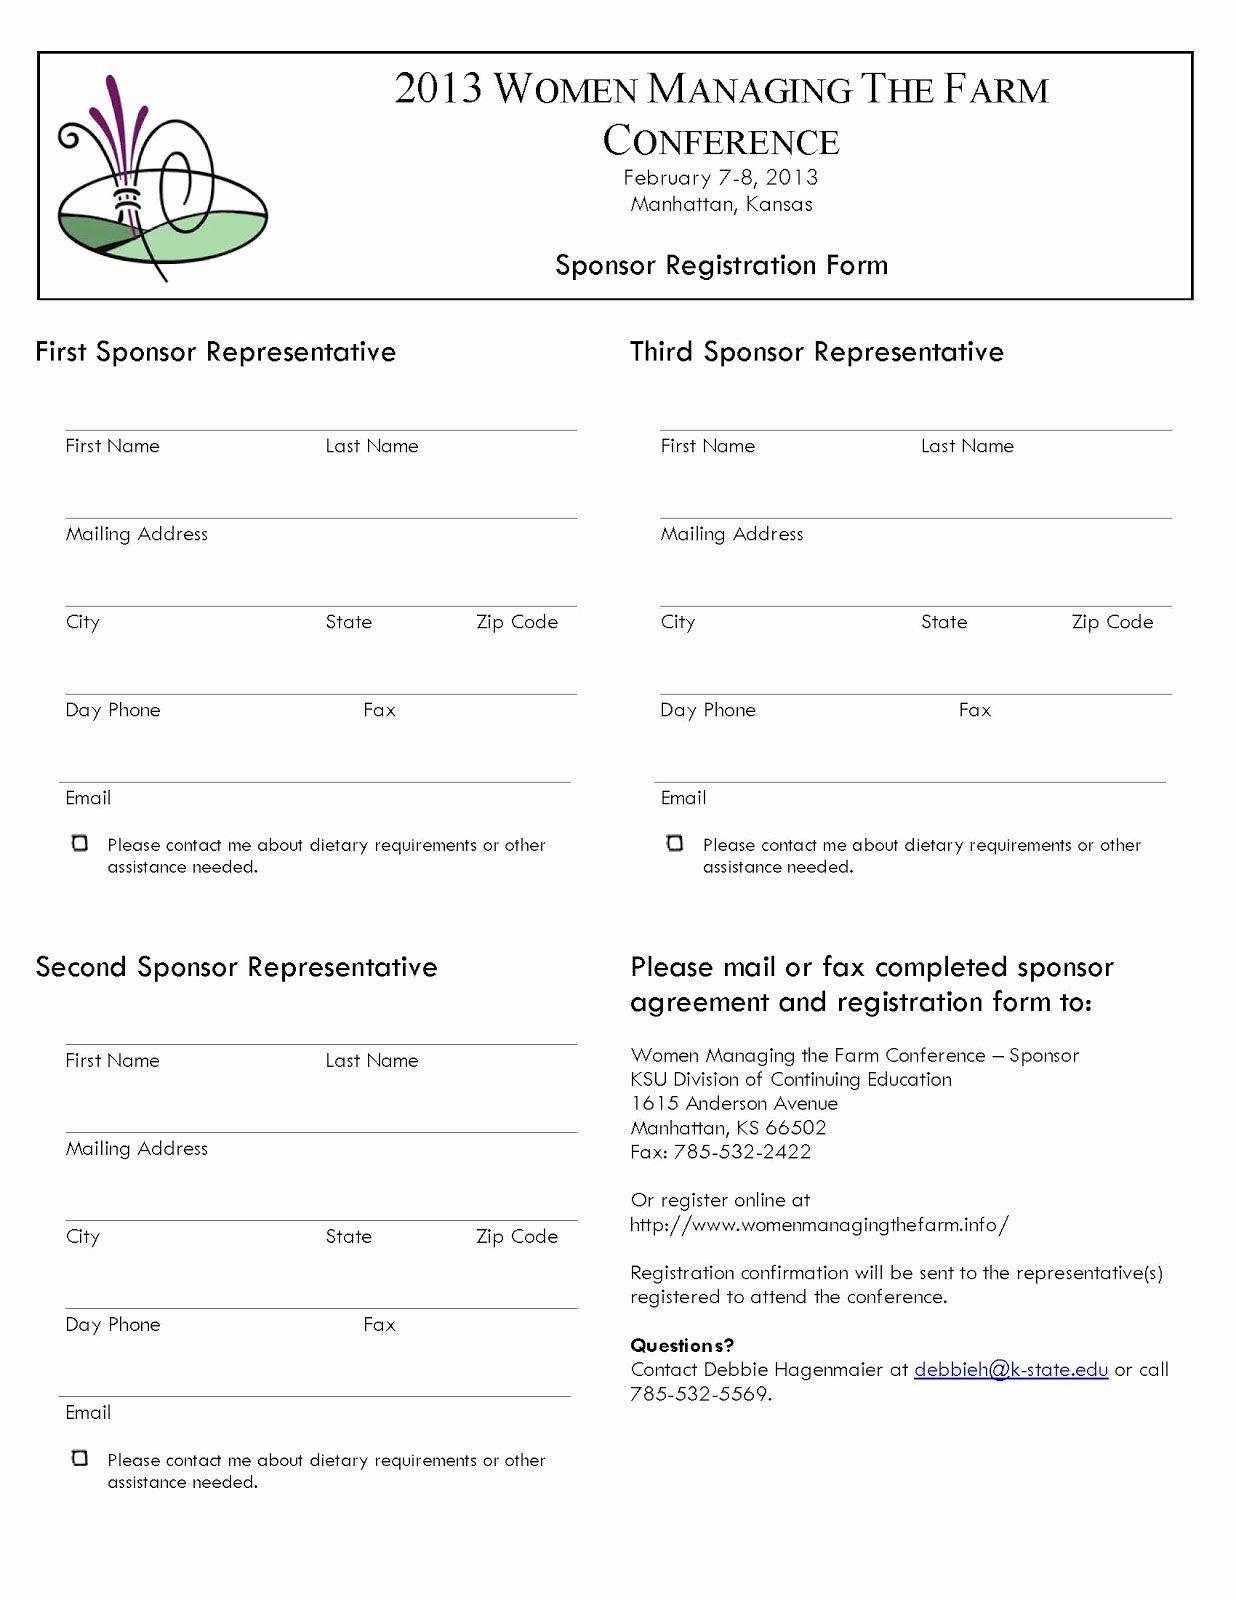 Conference Registration forms Template Awesome Women Managing the Farm Conference Kansas Sponsorship